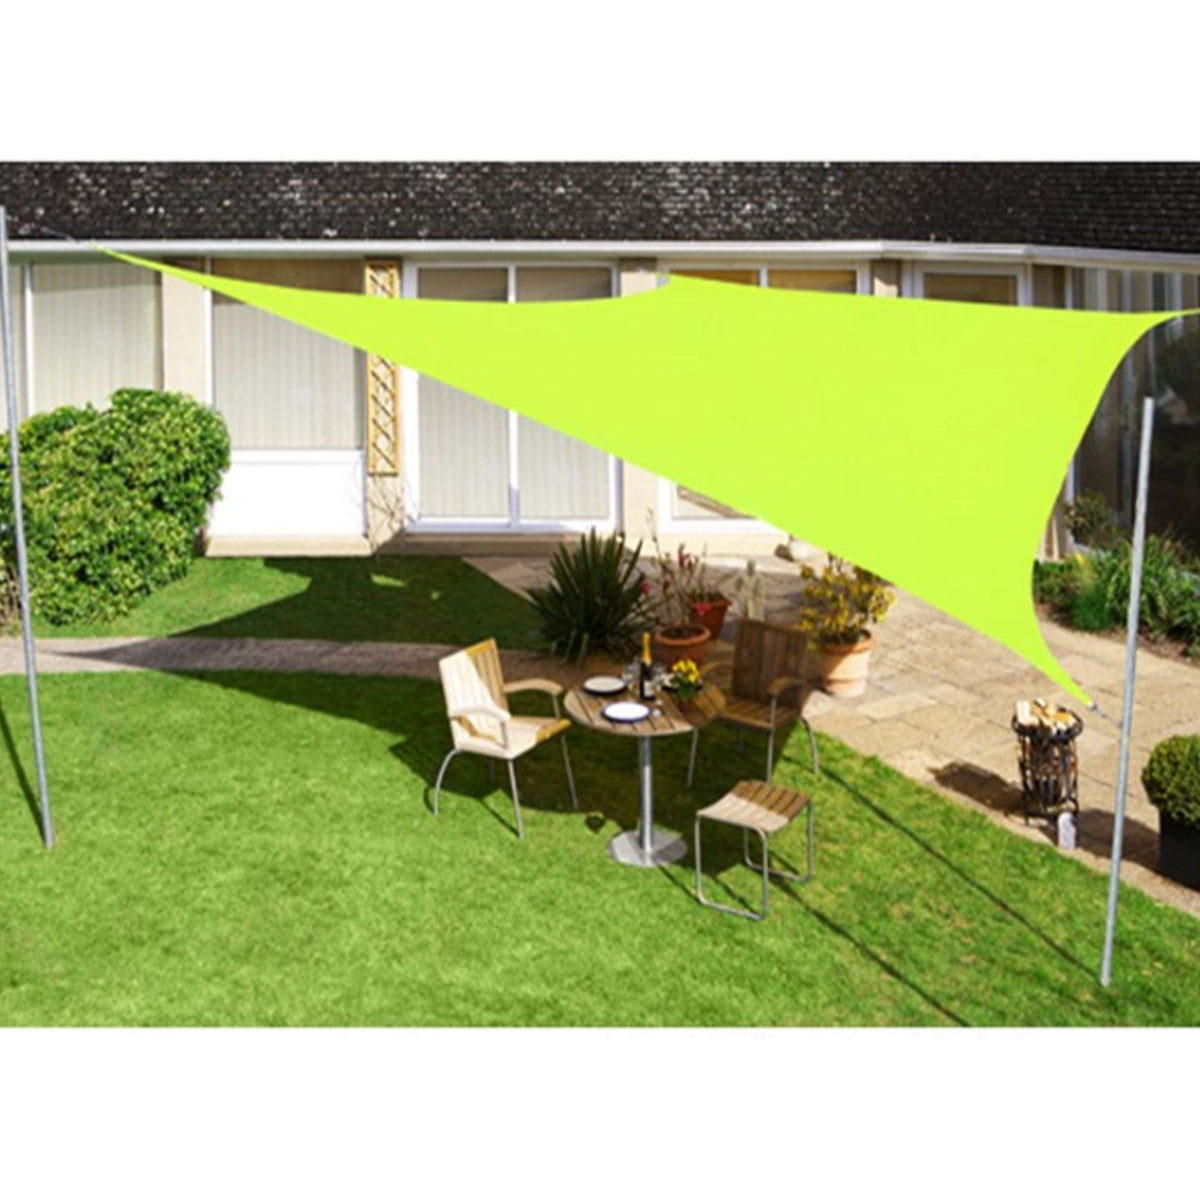 Green Yellow Tent Sunshade Sail Waterproof 420D Oxford Polyester Garden Canopy Cover Awning Outdoor Marine Yard Plant Protection